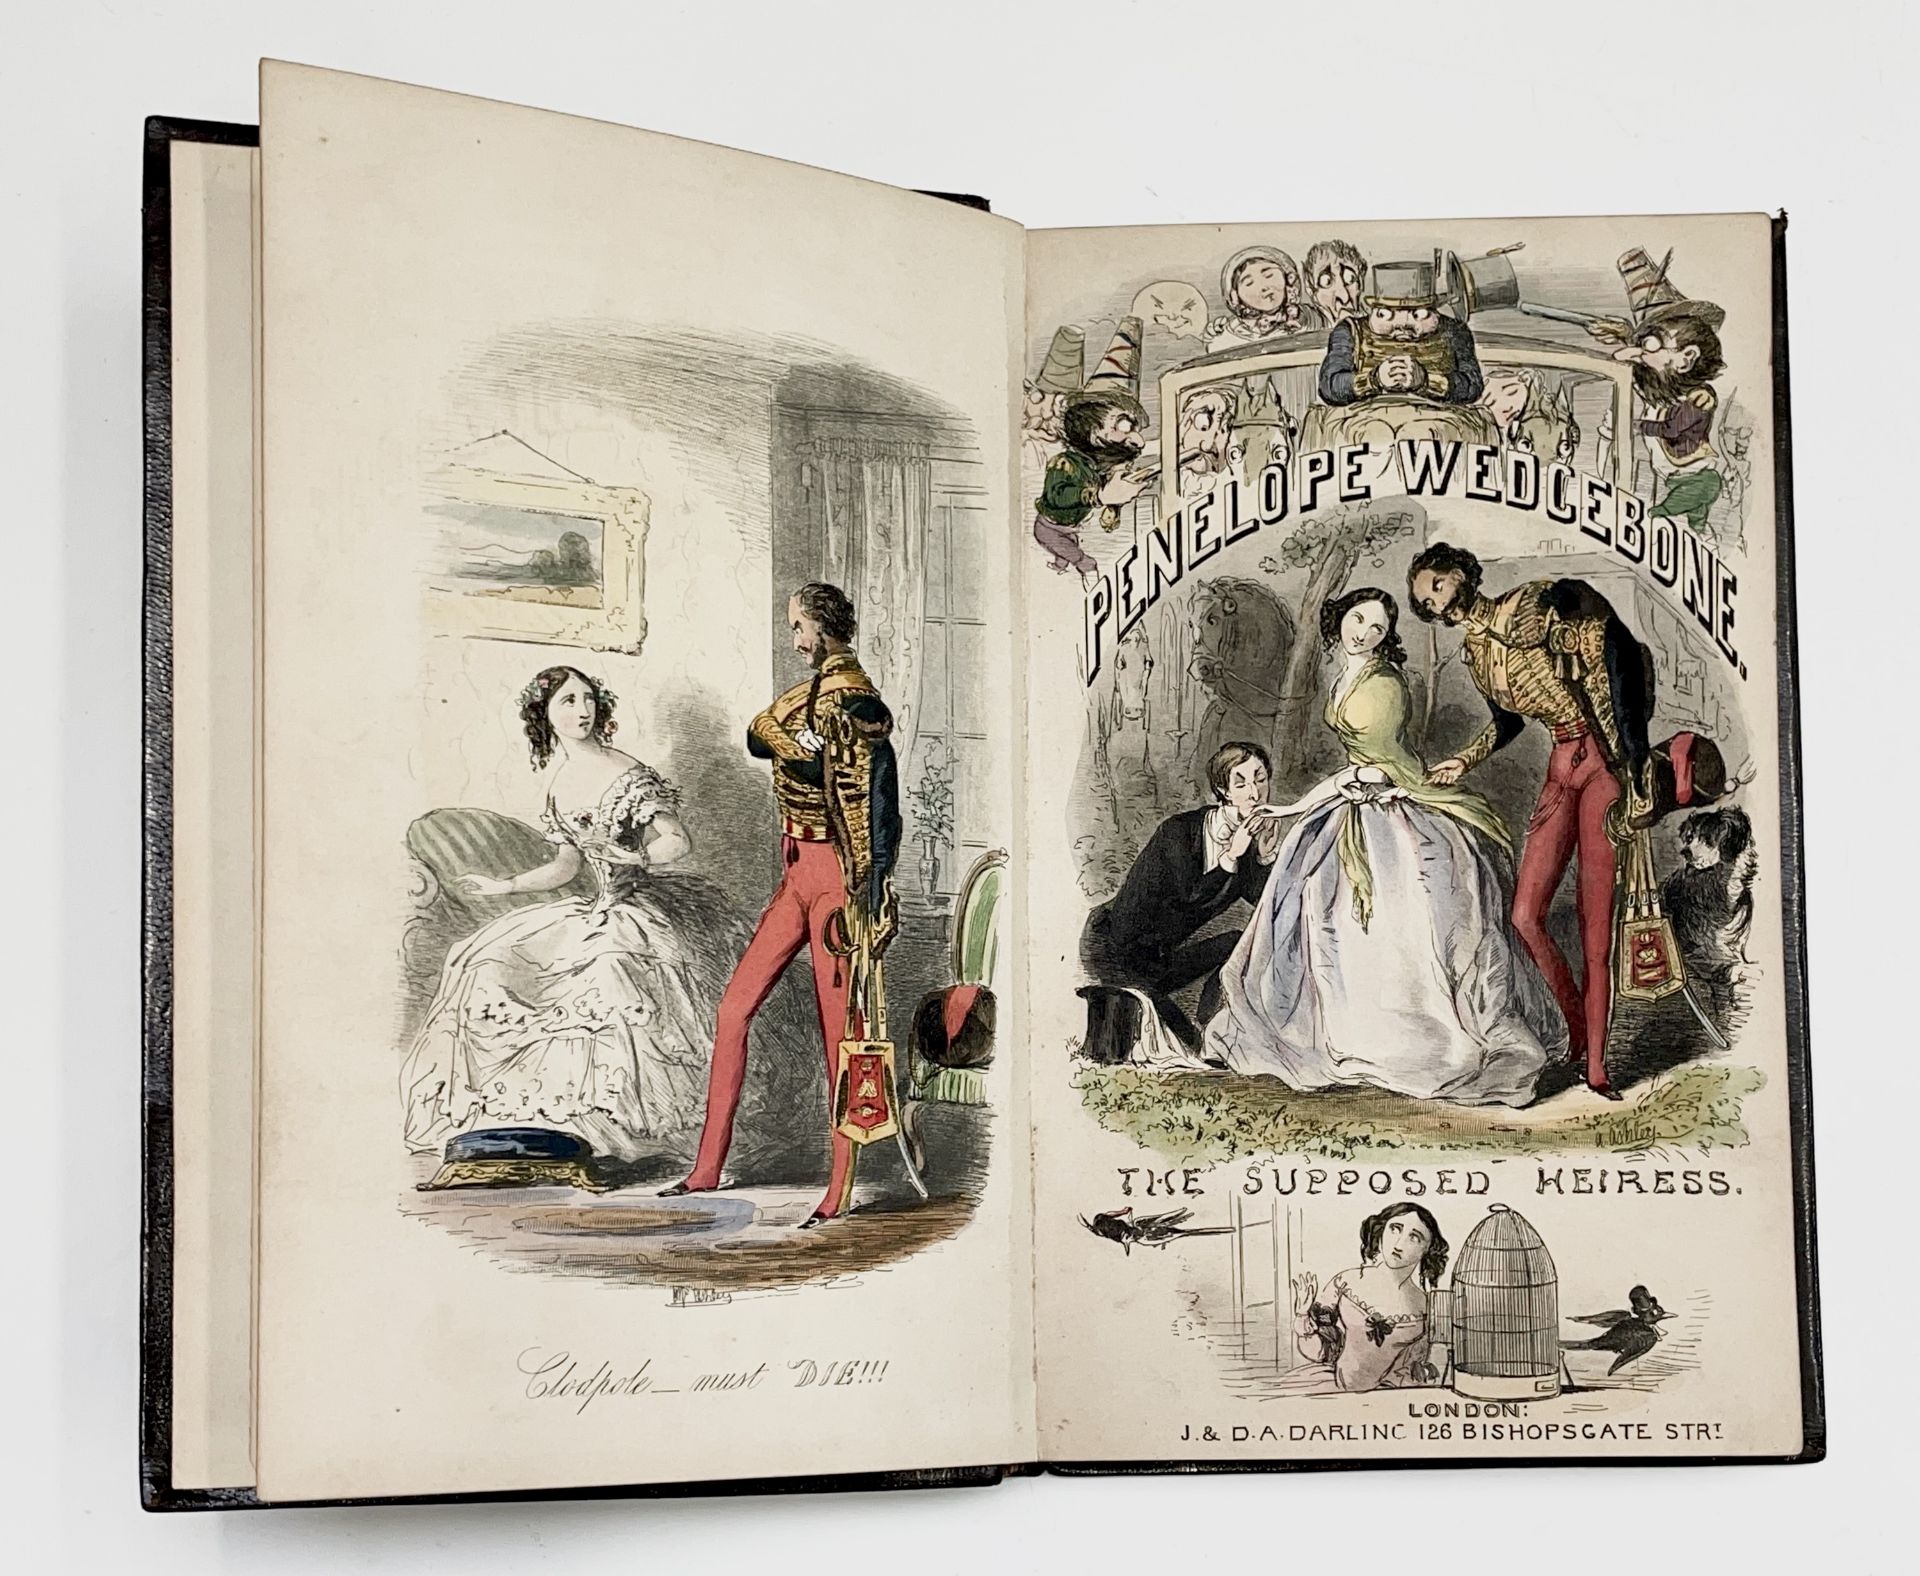 LIEUT-COL HORT. 'Penelope Wedgebone: The Supposed Heiress.' First Edition, eight hand-coloured - Image 7 of 8